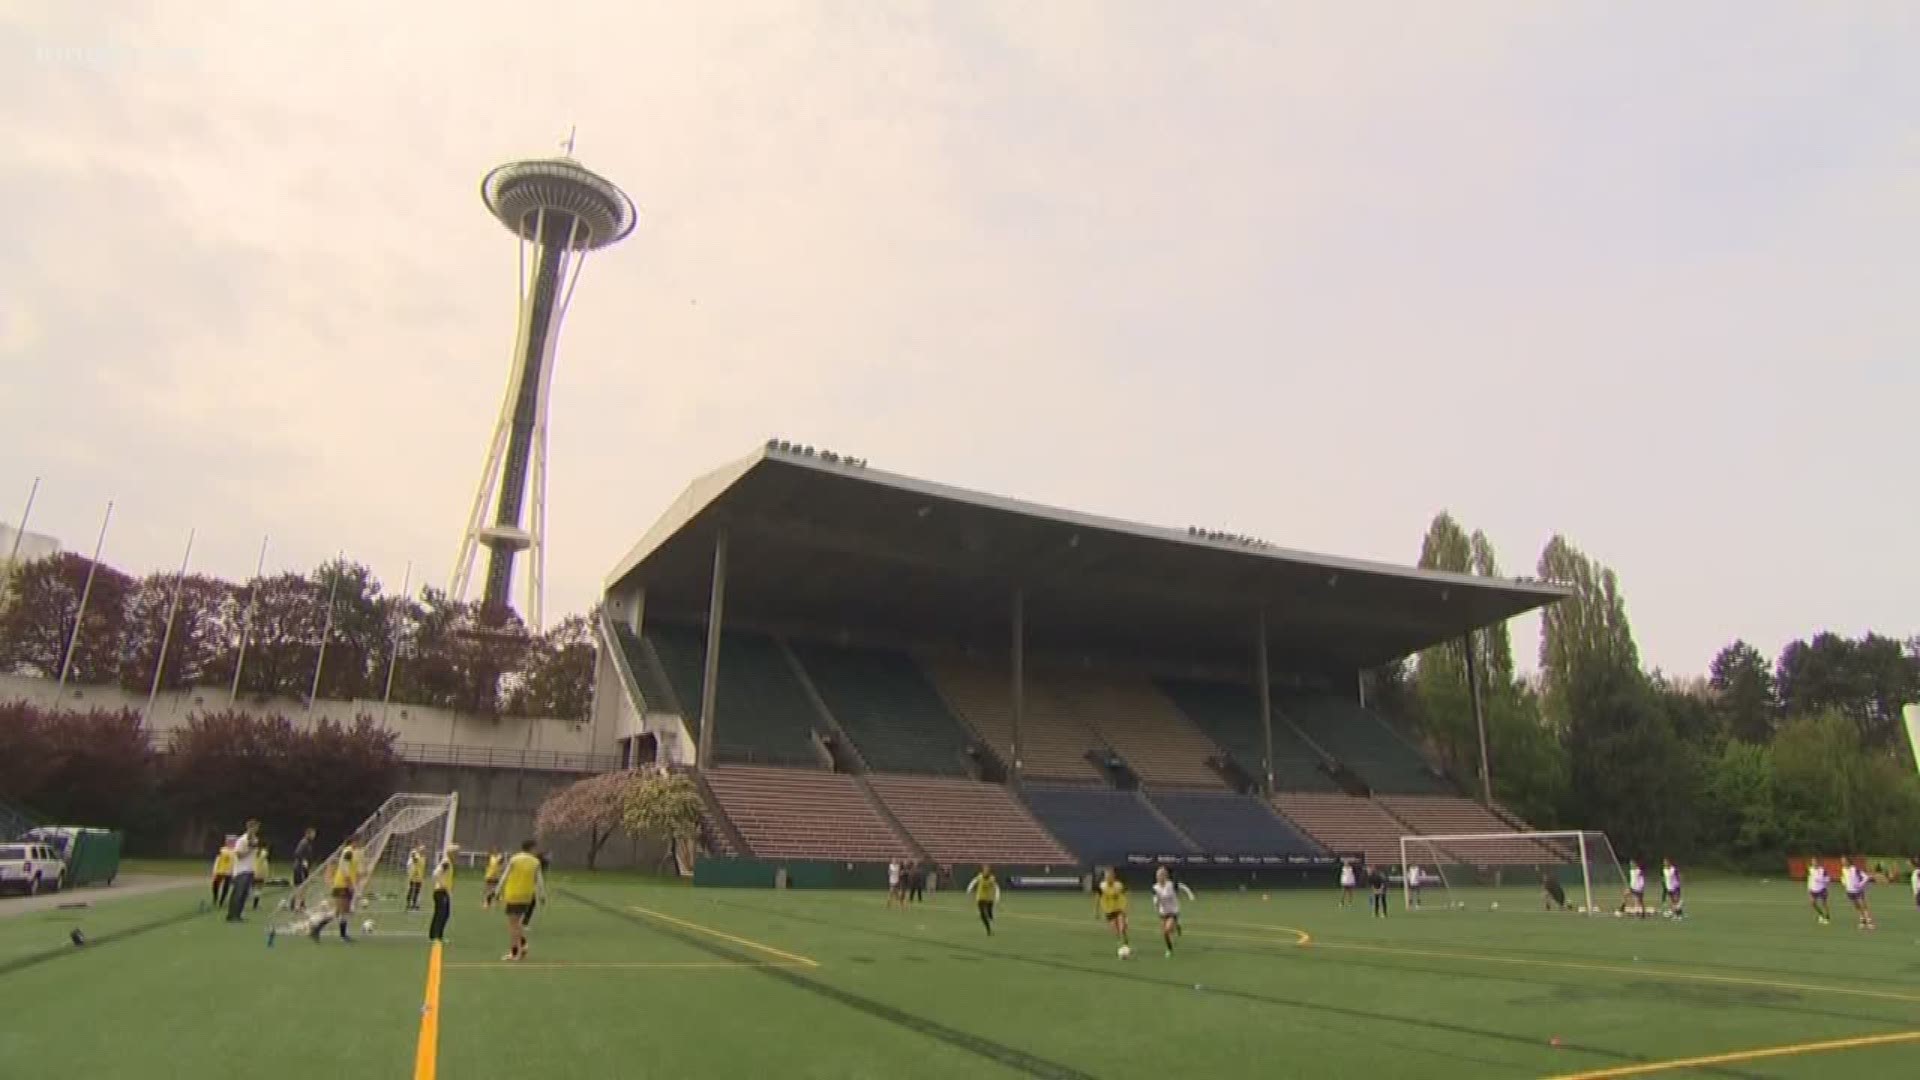 Memorial Day brings renewed attention to one of Seattle's oldest monuments. The future of Memorial Stadium, which stands as a tribute to fallen soldiers, remains in limbo. KING 5's Chris Daniels has the story.